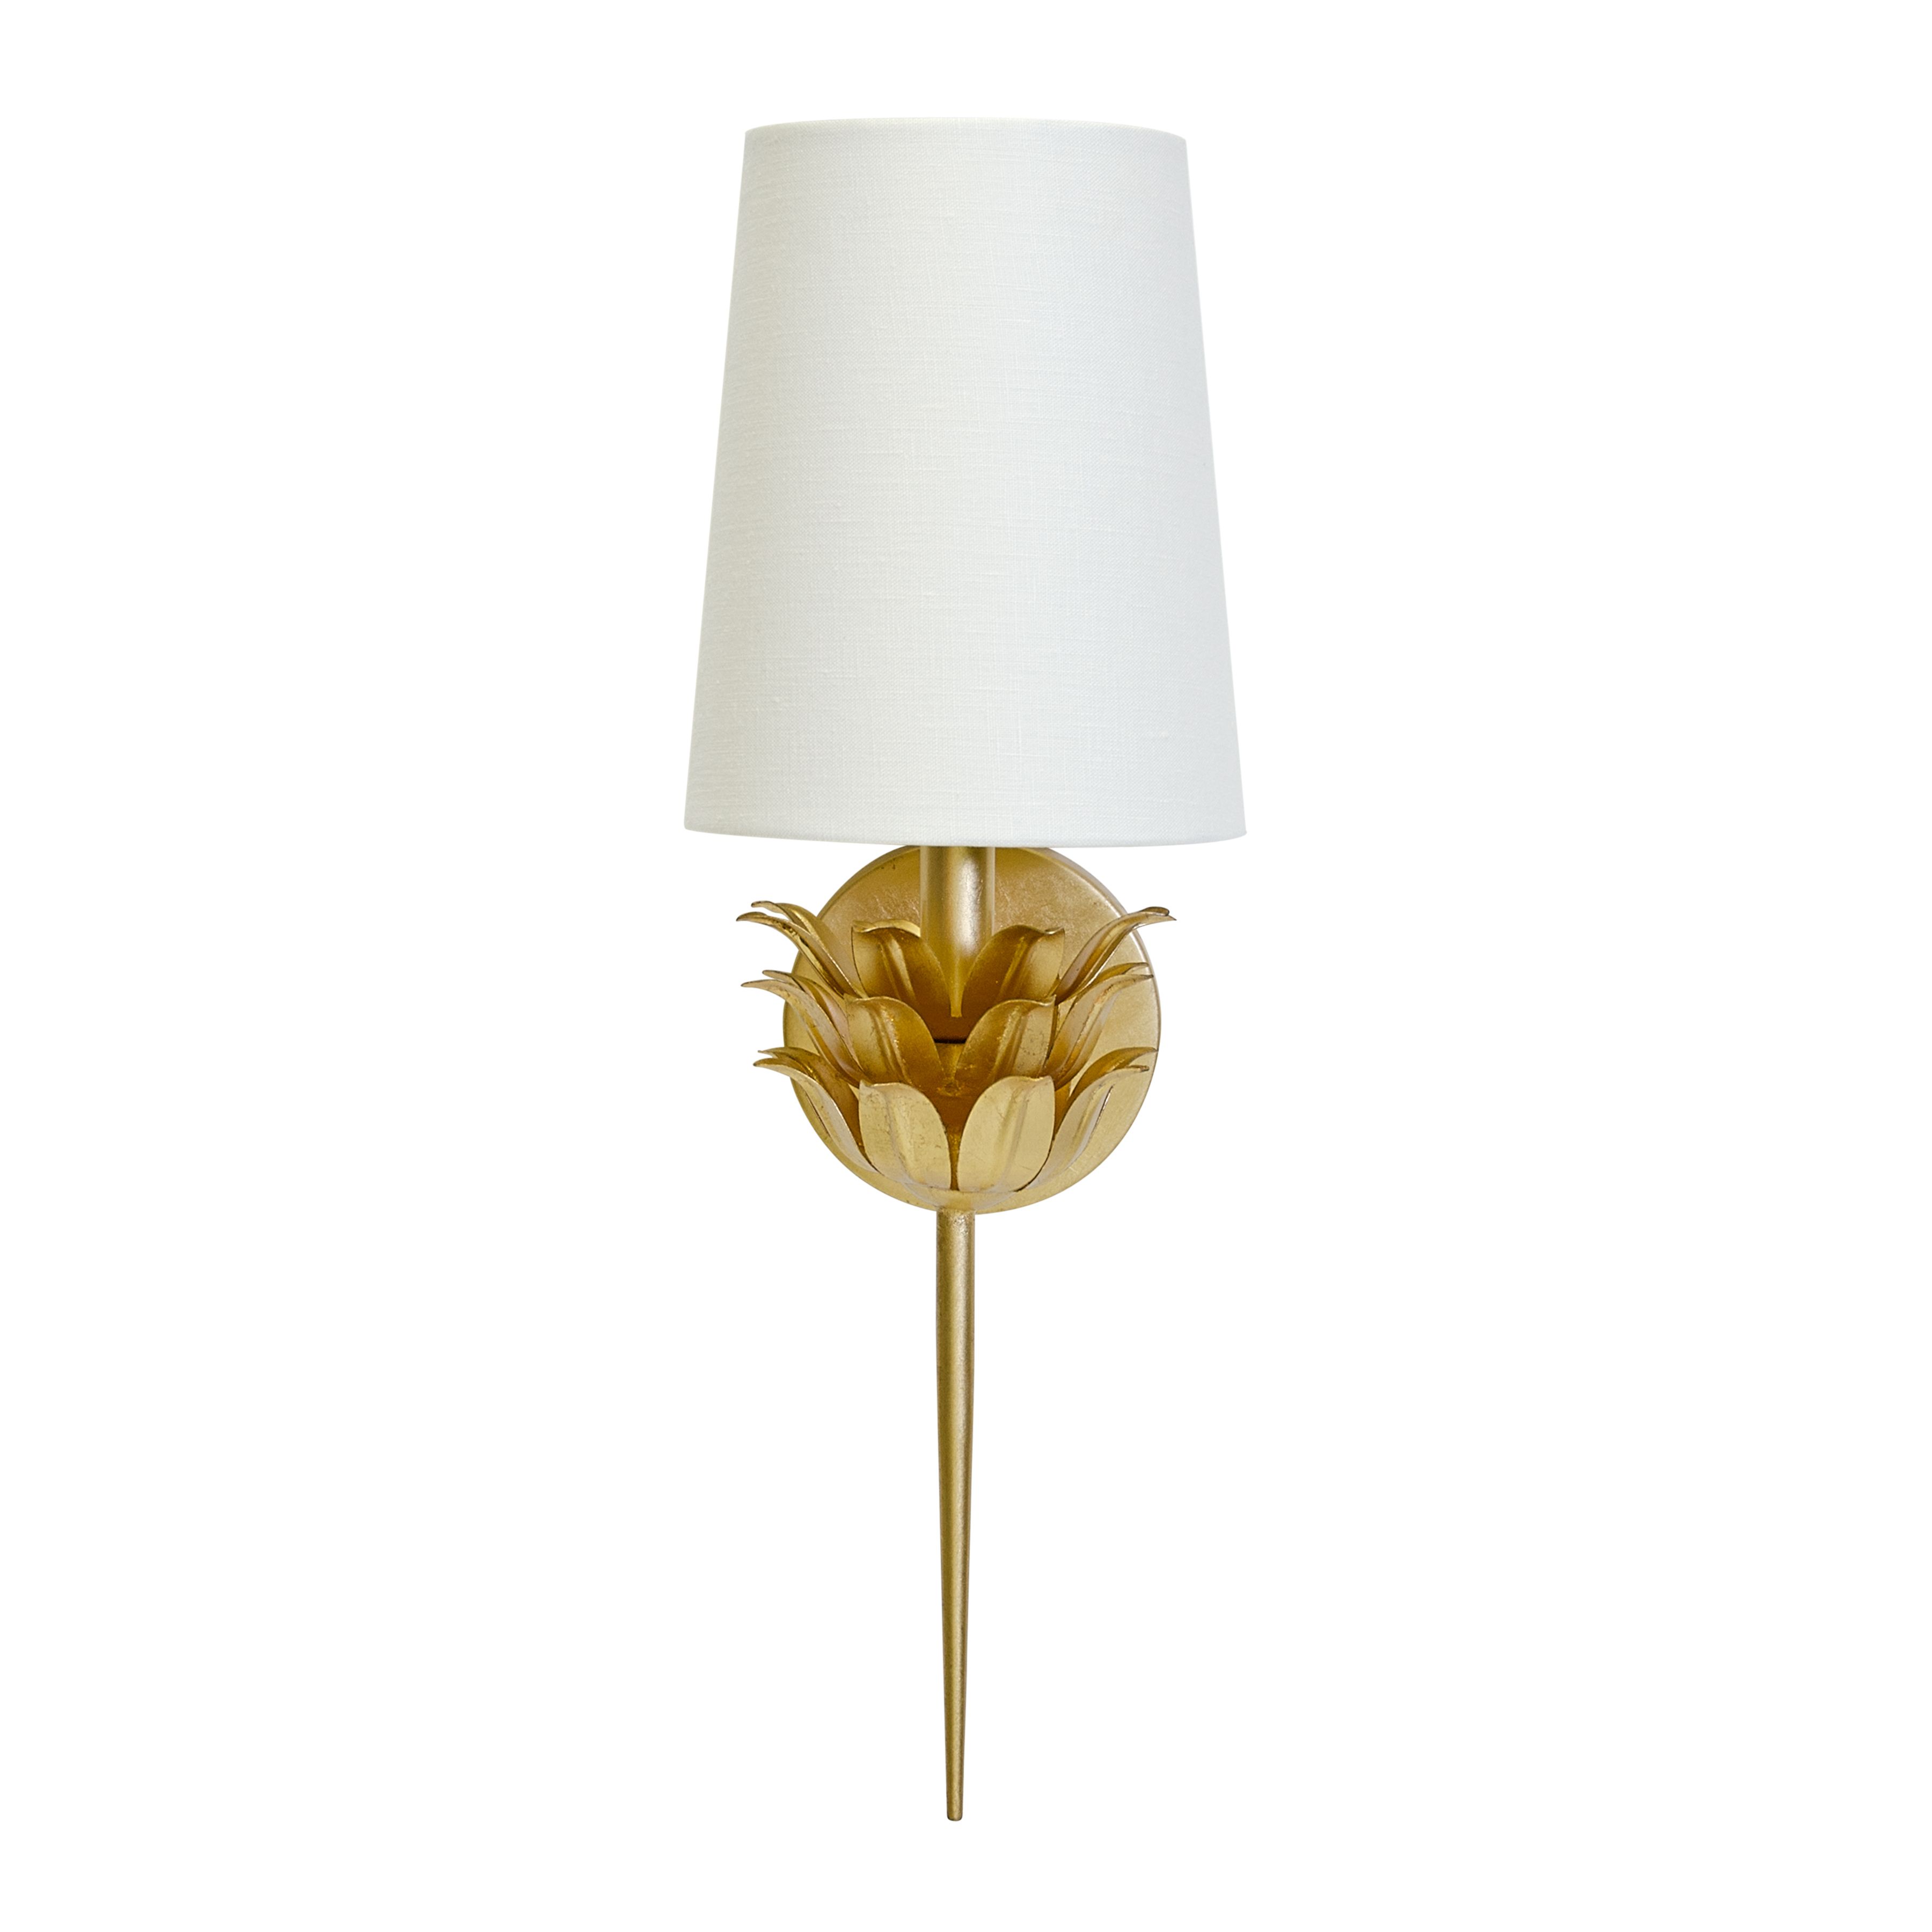 Gold Leaf One Arm Sconce with 3 Layer Leaf Motif & White Linen Shade